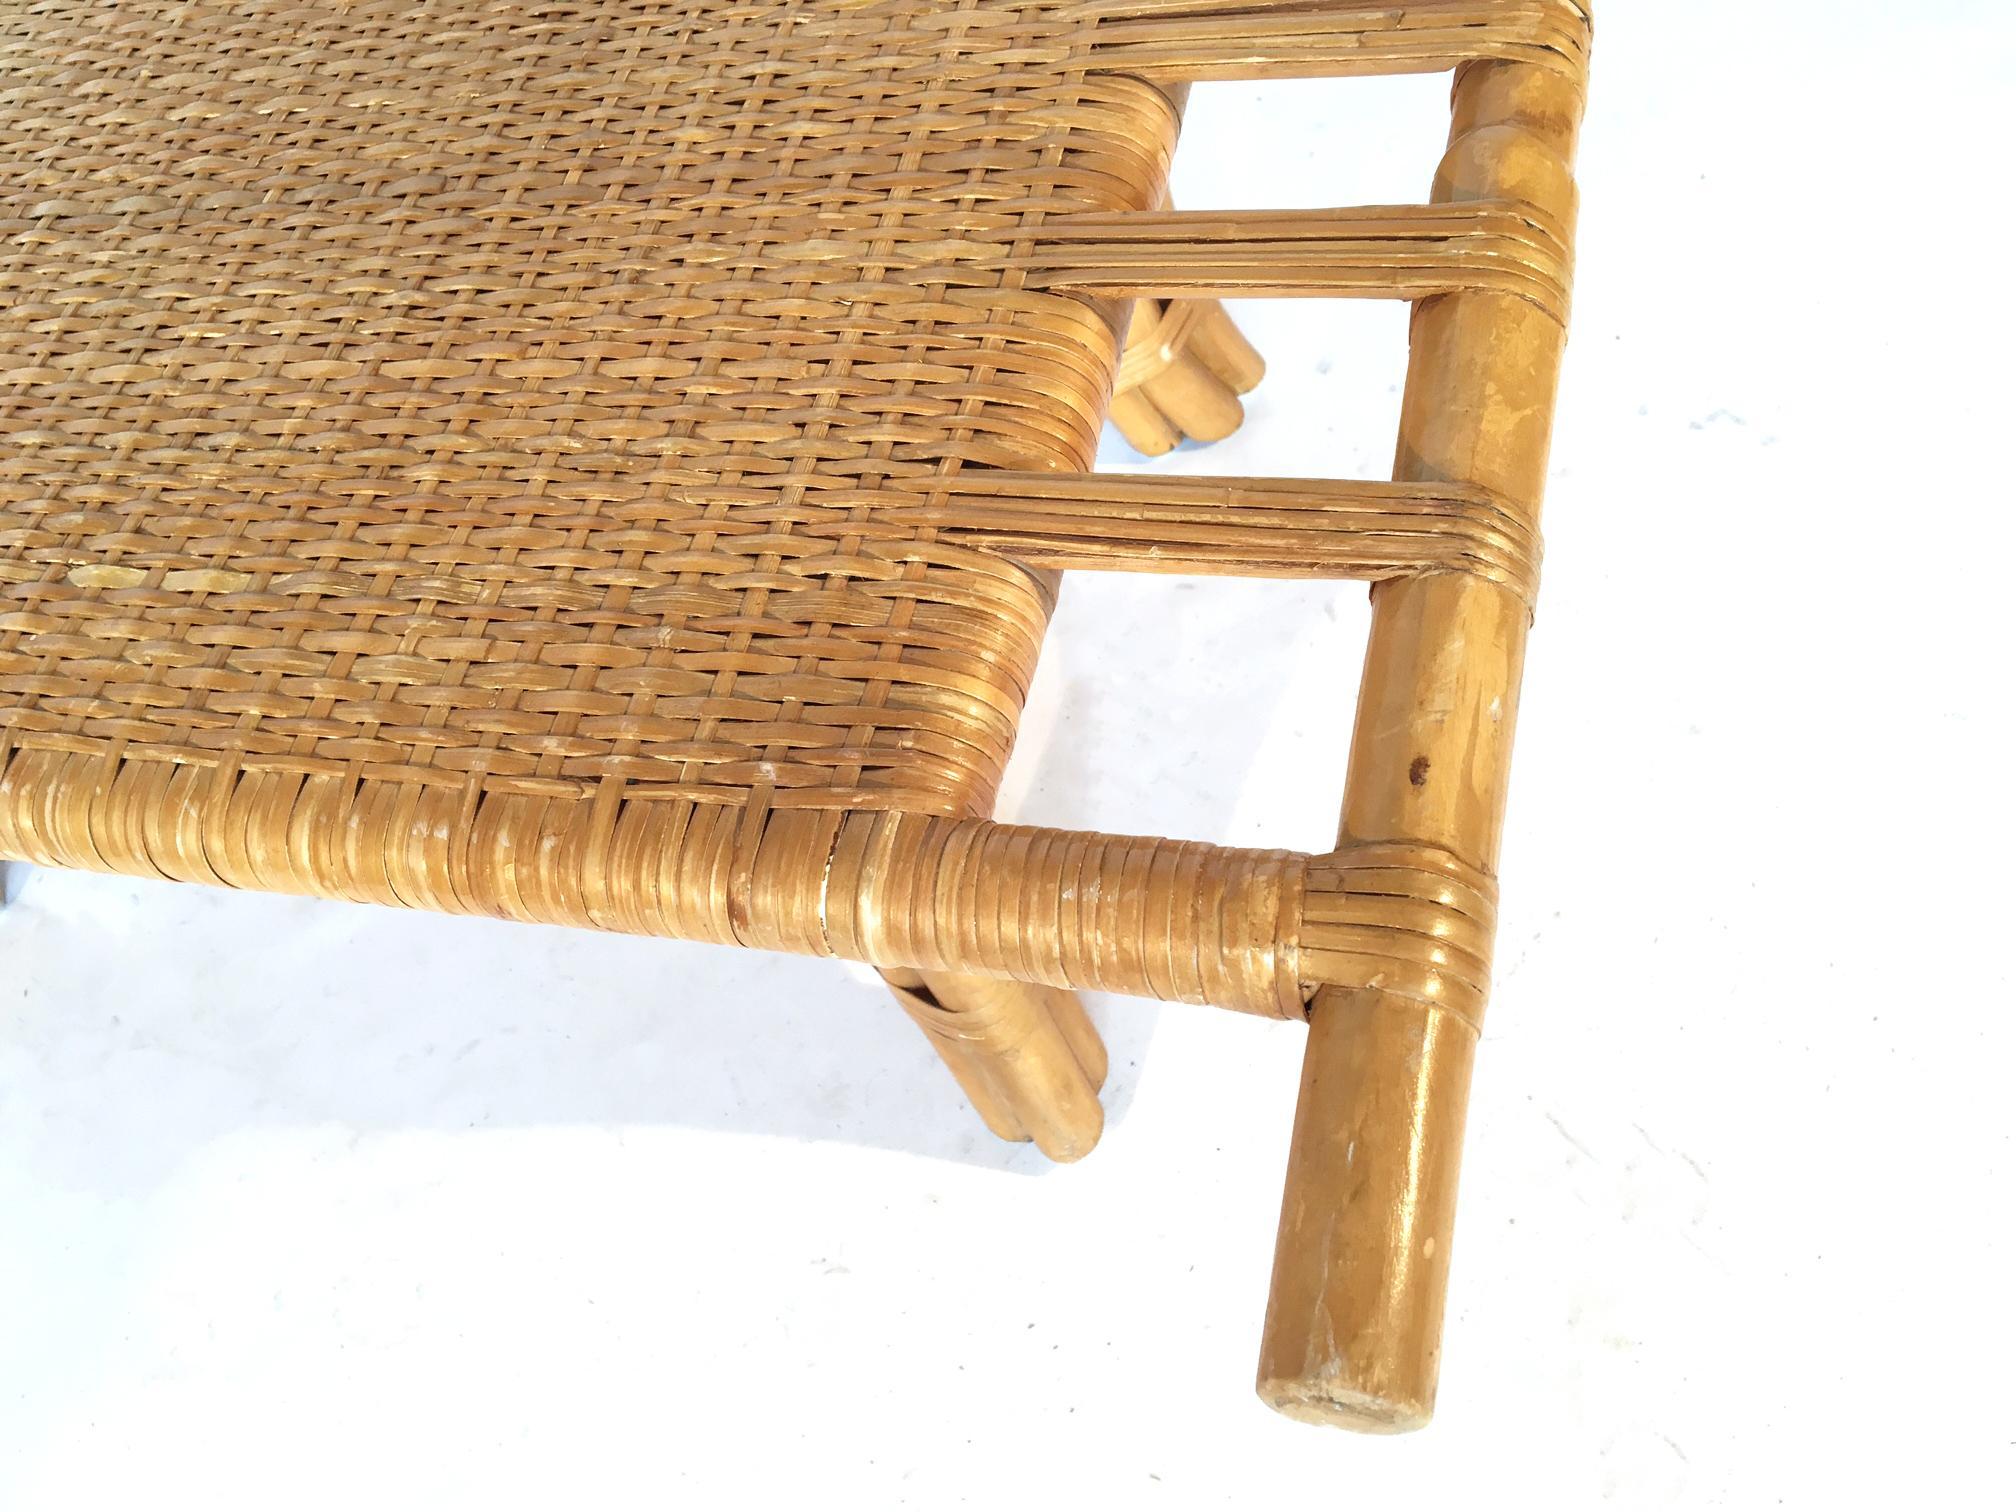 Organic Modern Vintage Pagoda Style Bamboo with Cane Coffee Table